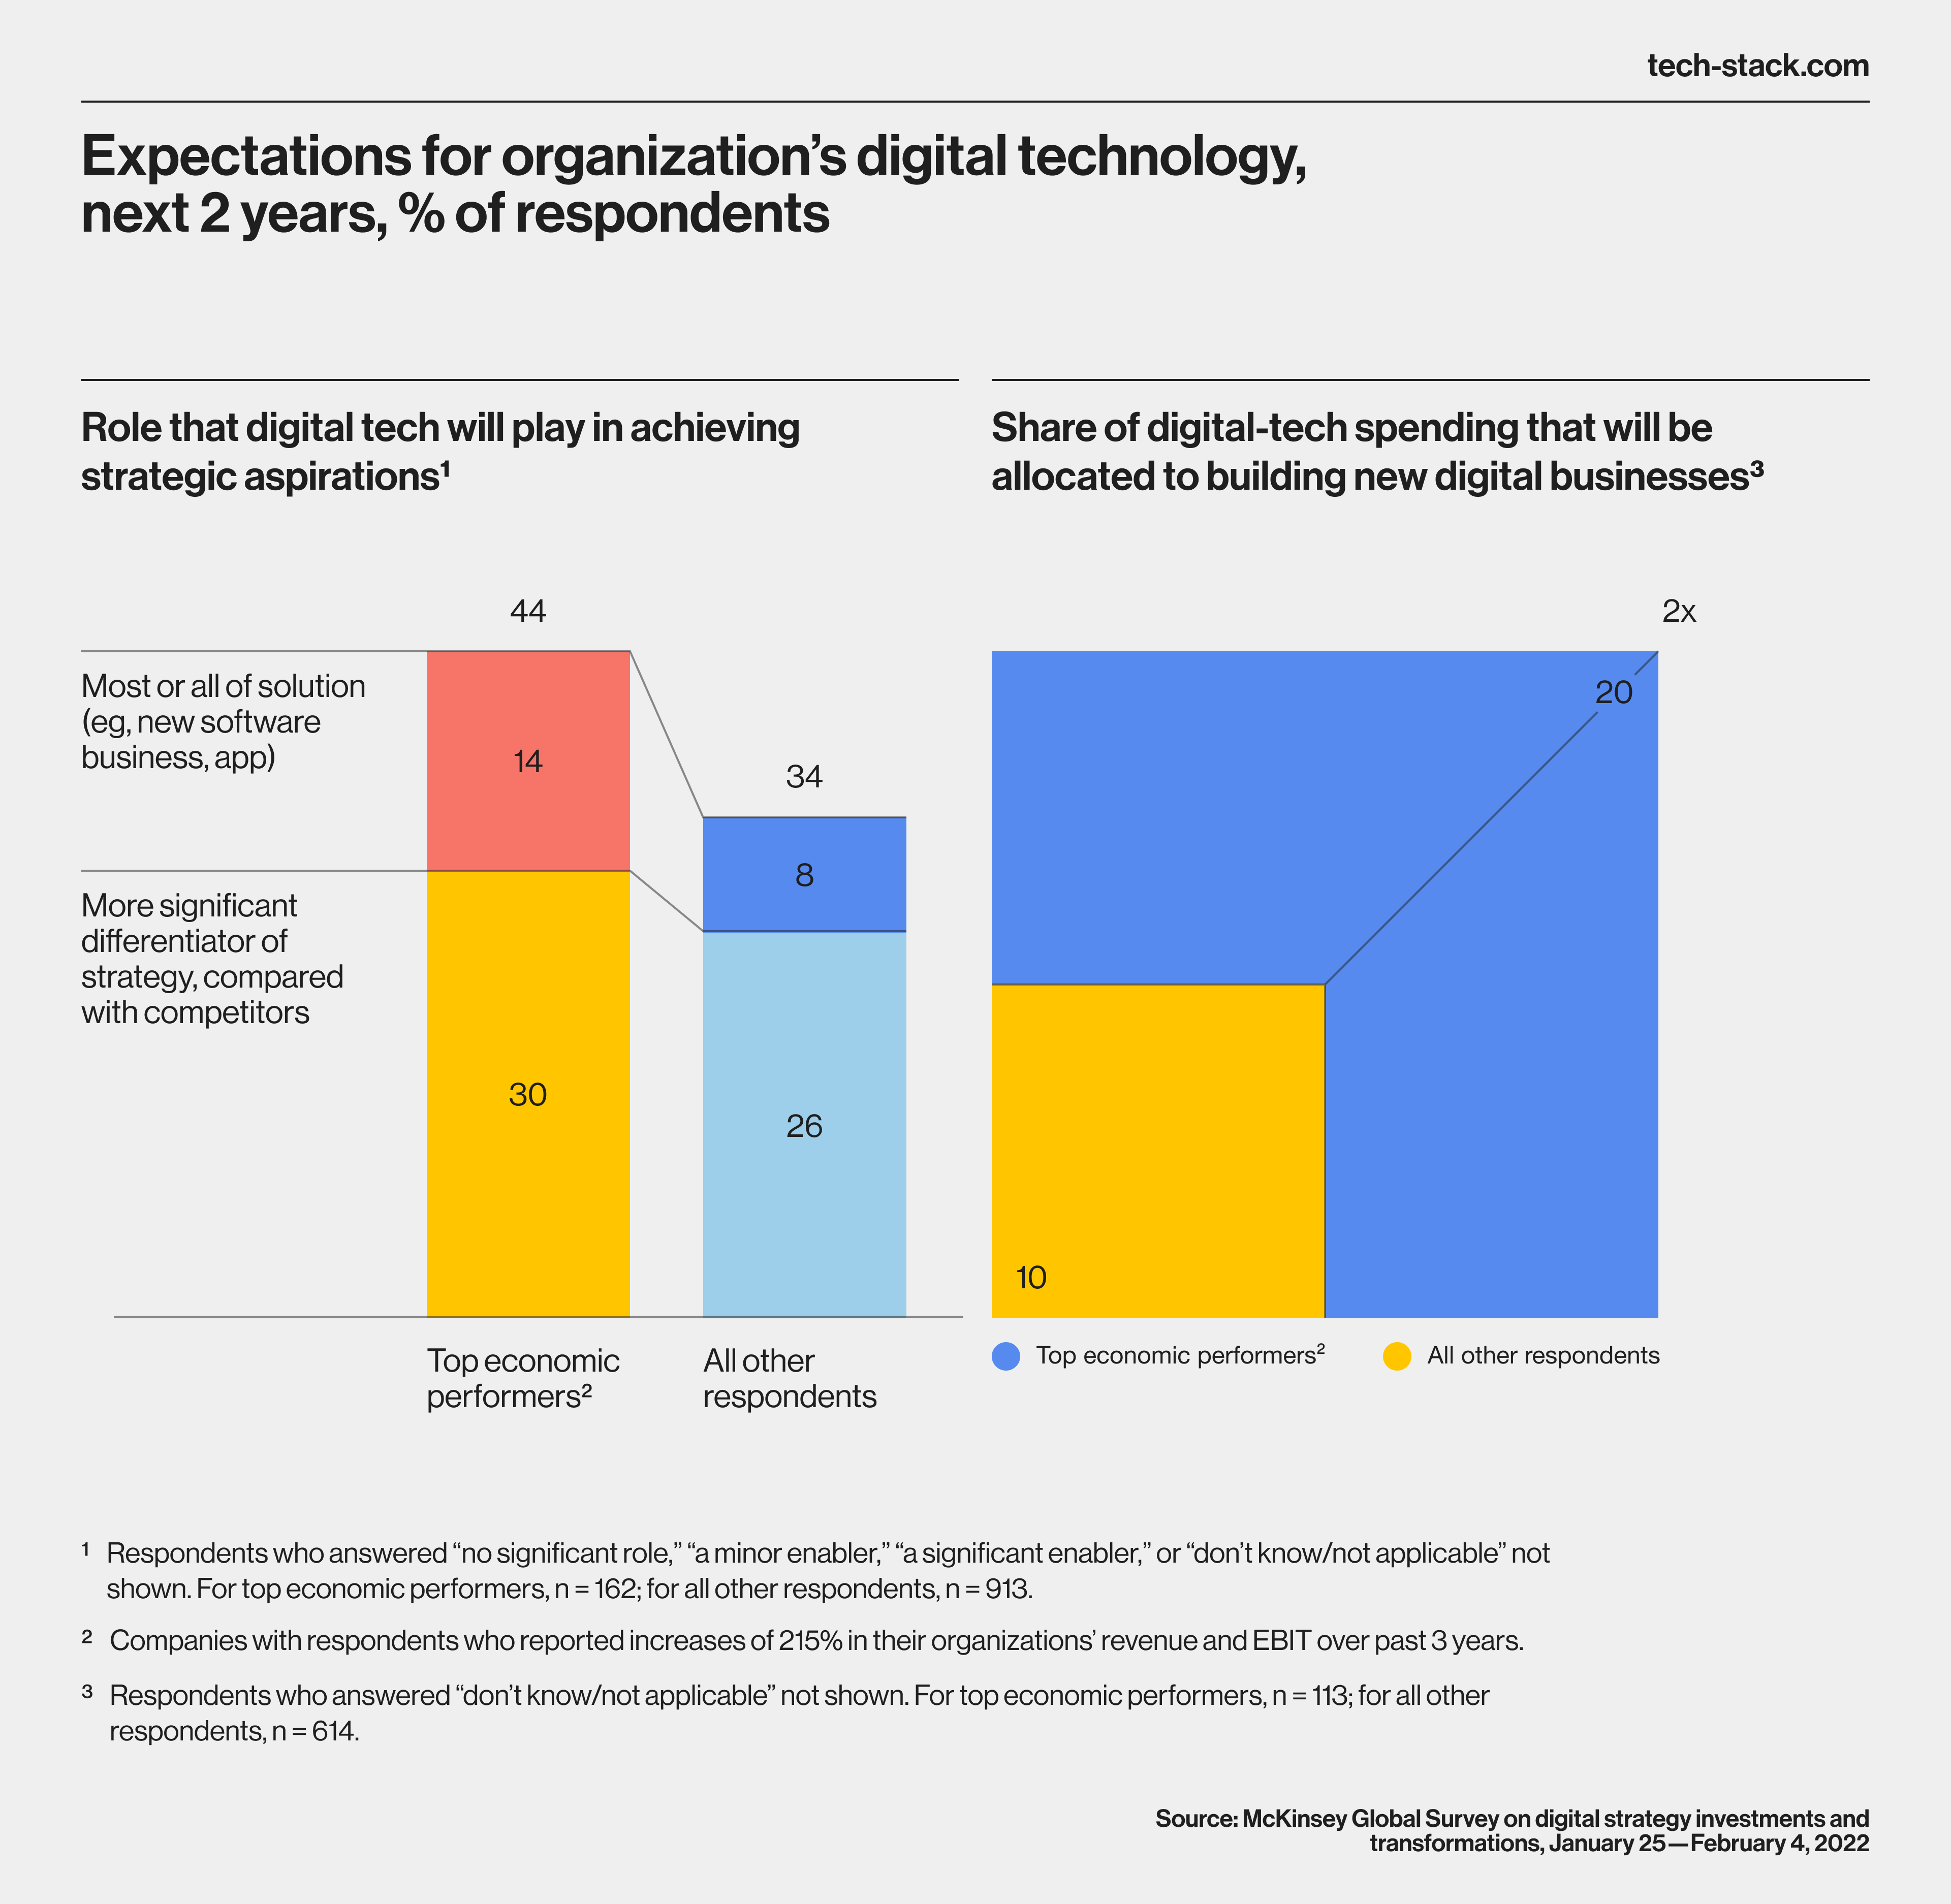 Expectations for organisation's digital technology next 2 years